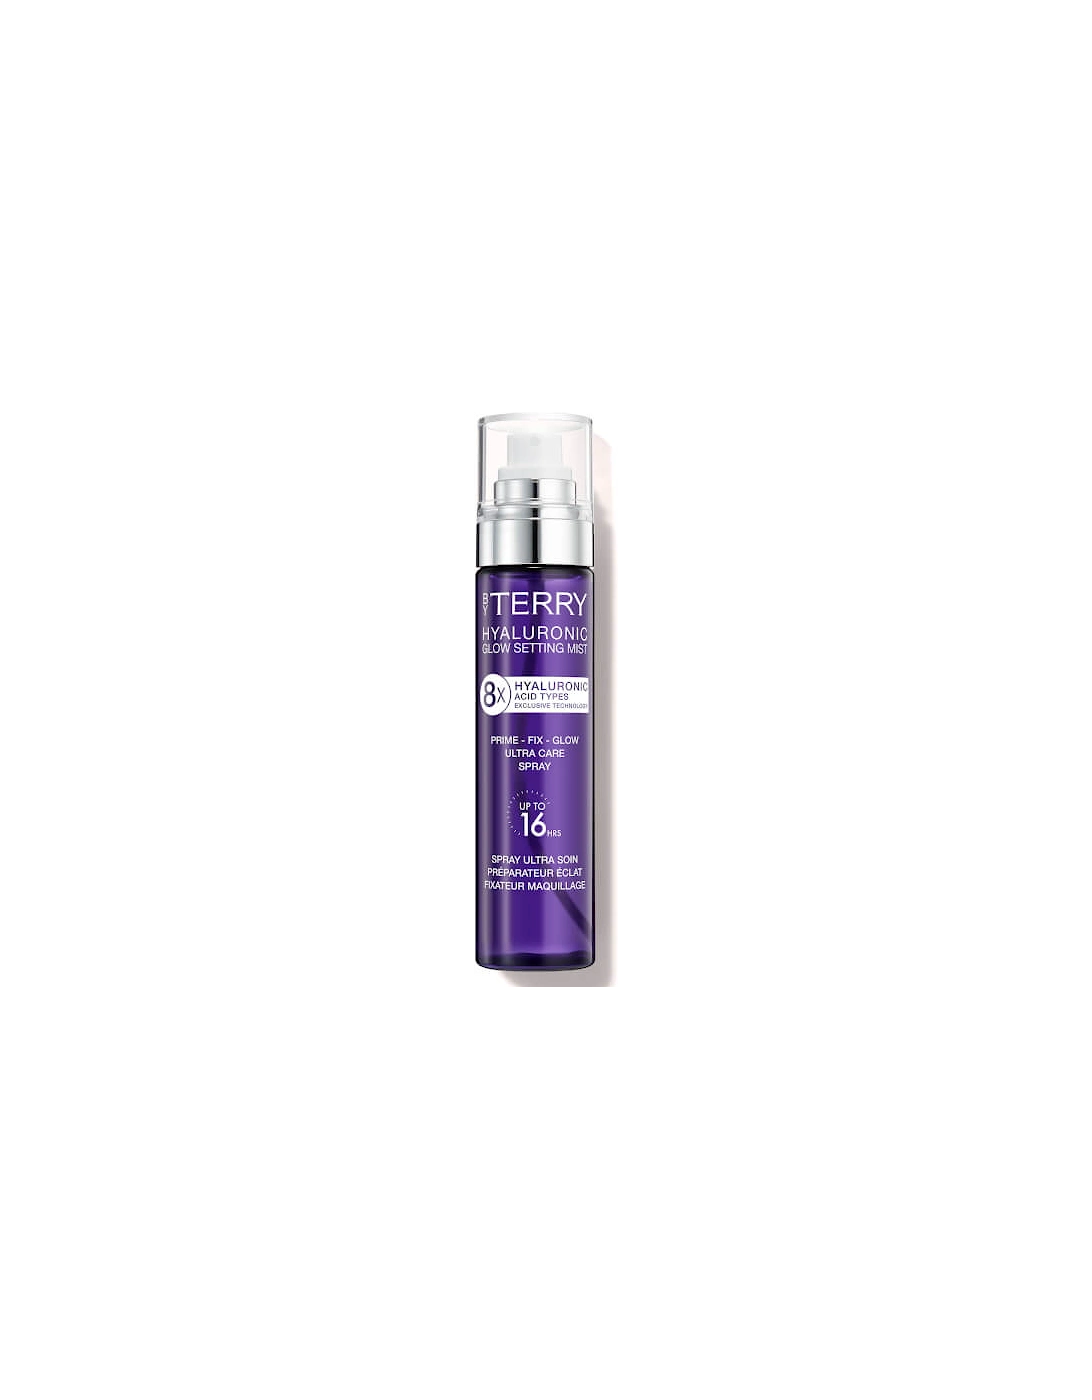 By Terry Hyaluronic Glow Setting Mist, 2 of 1